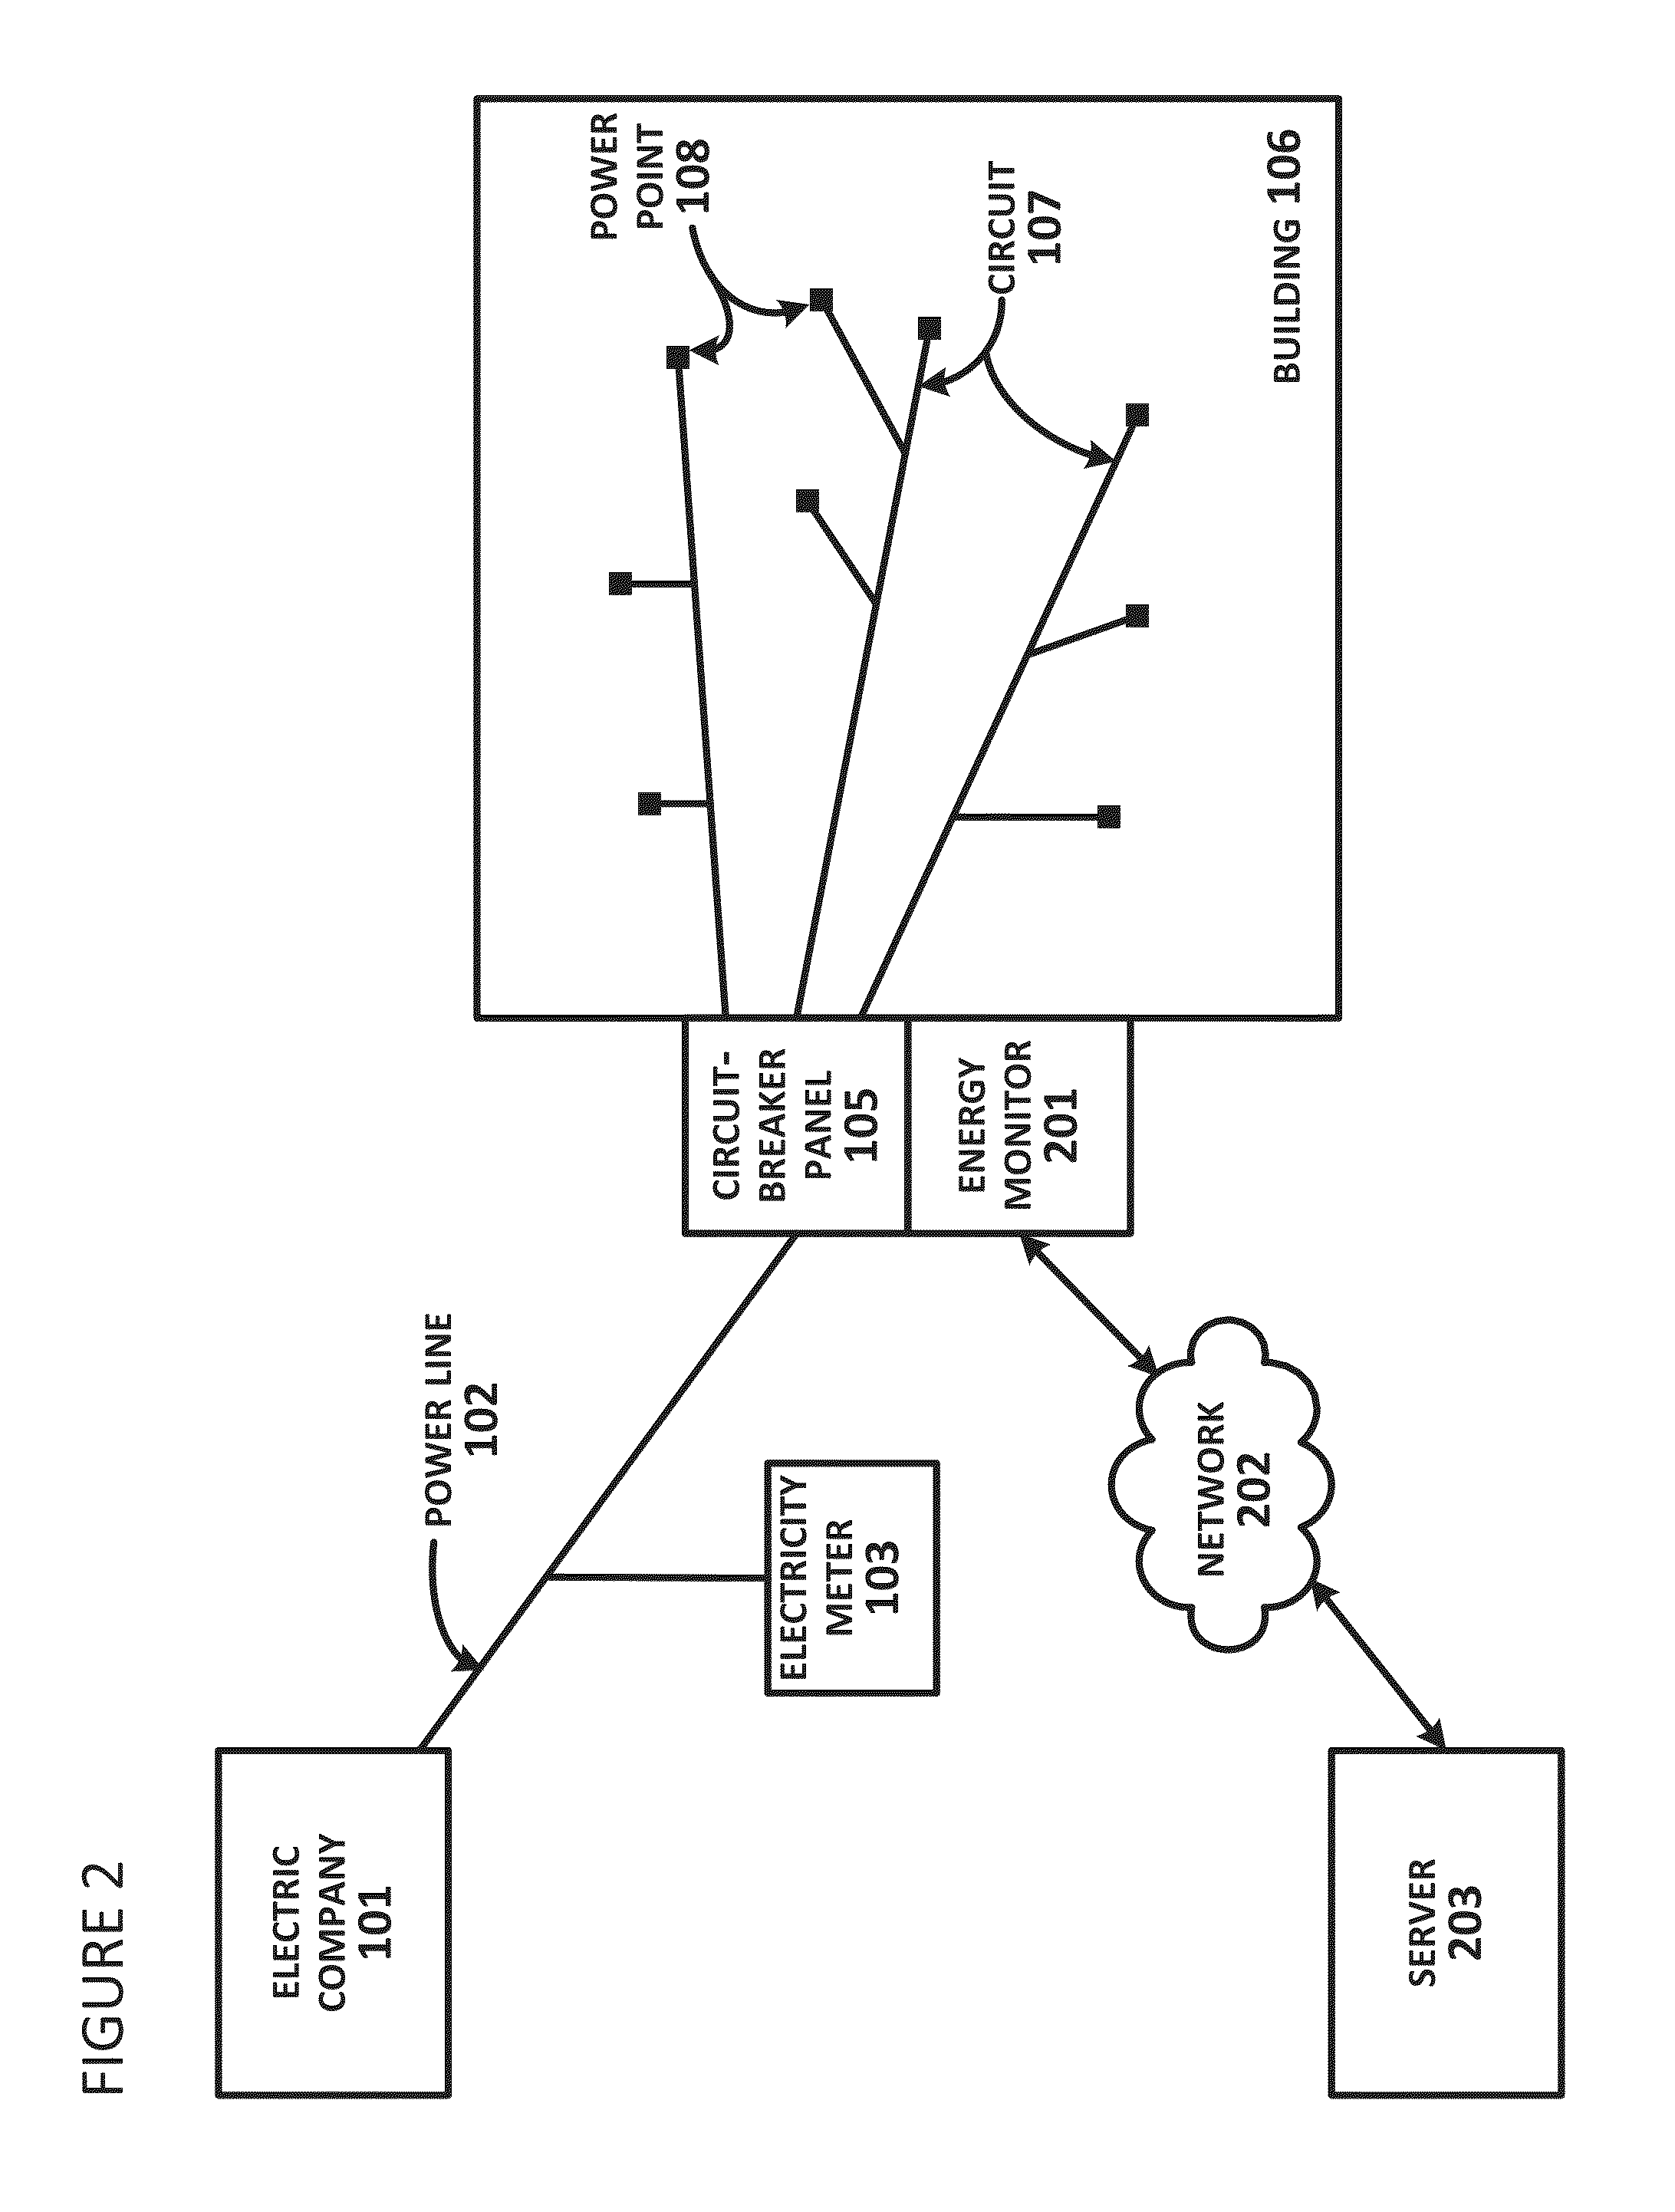 System and Method of Waveform Analysis to Identify and Characterize Power-Consuming Devices on Electrical Circuits